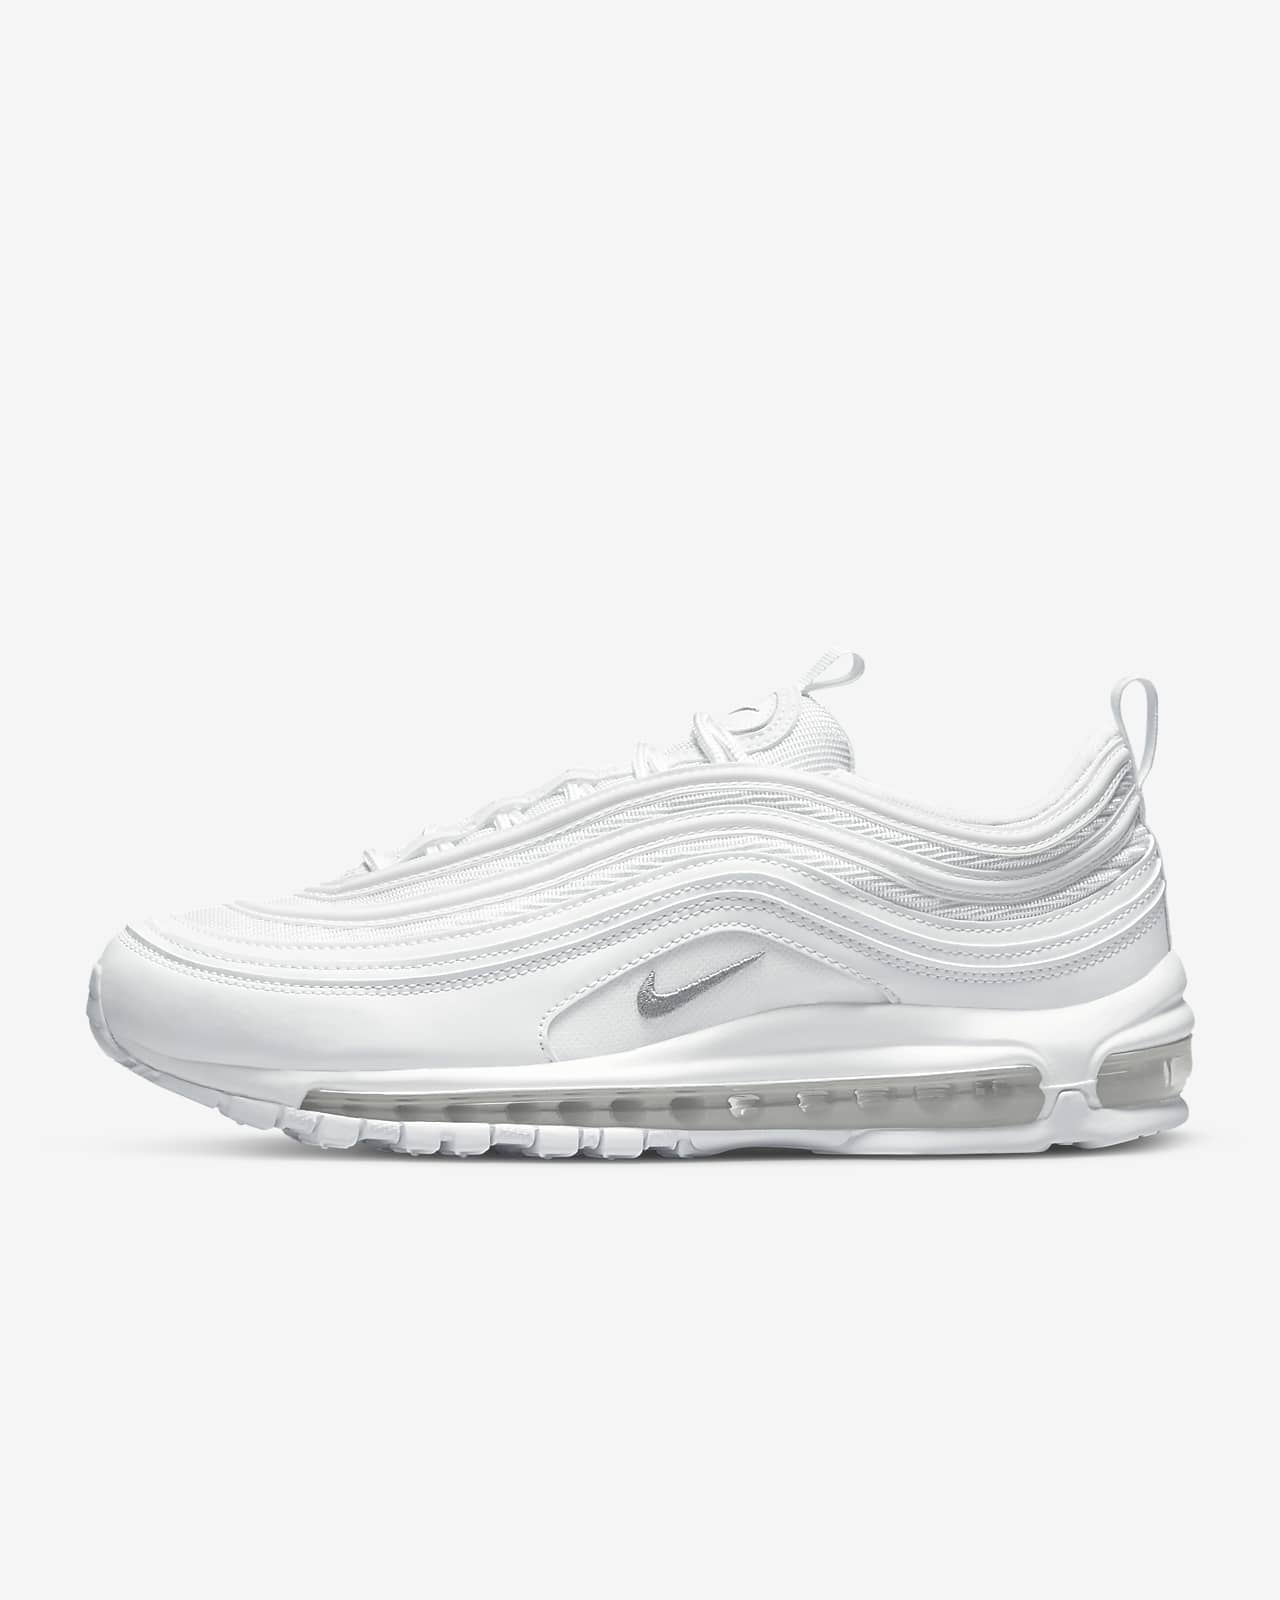 Nike Airmax Flash red white and blue air max 97 Sales, 53% OFF | www.chine-magazine.com